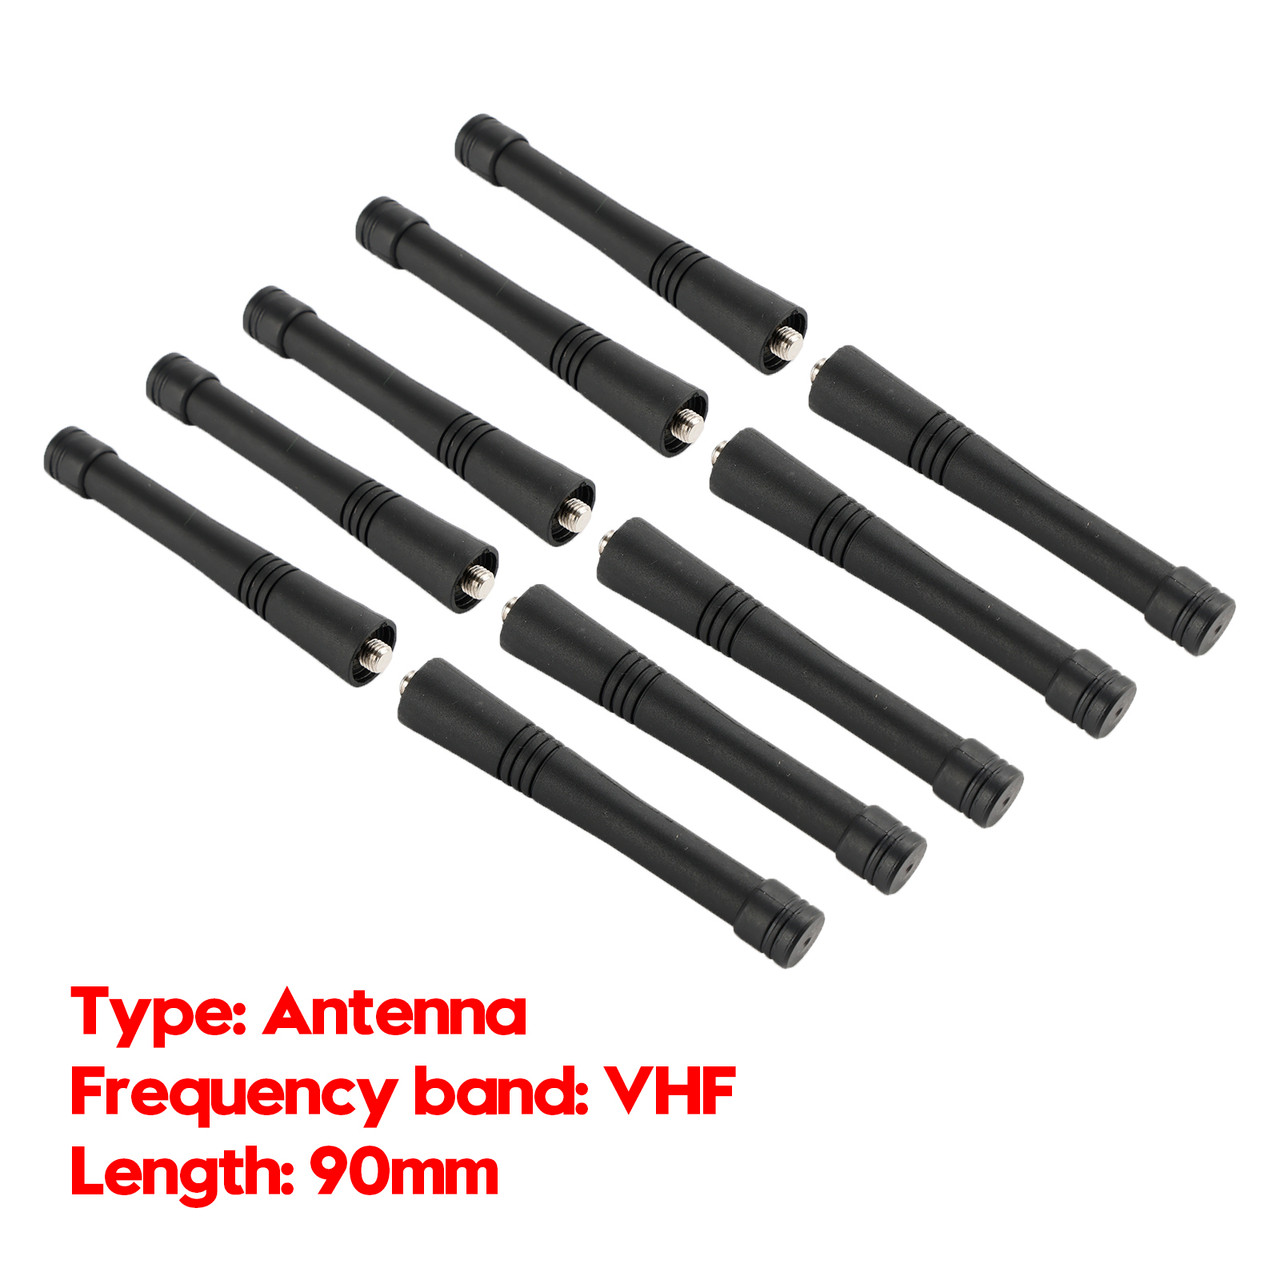 10x Short and Thick Antenna VHF Car Radio 90mm Antenna Fit for GP88